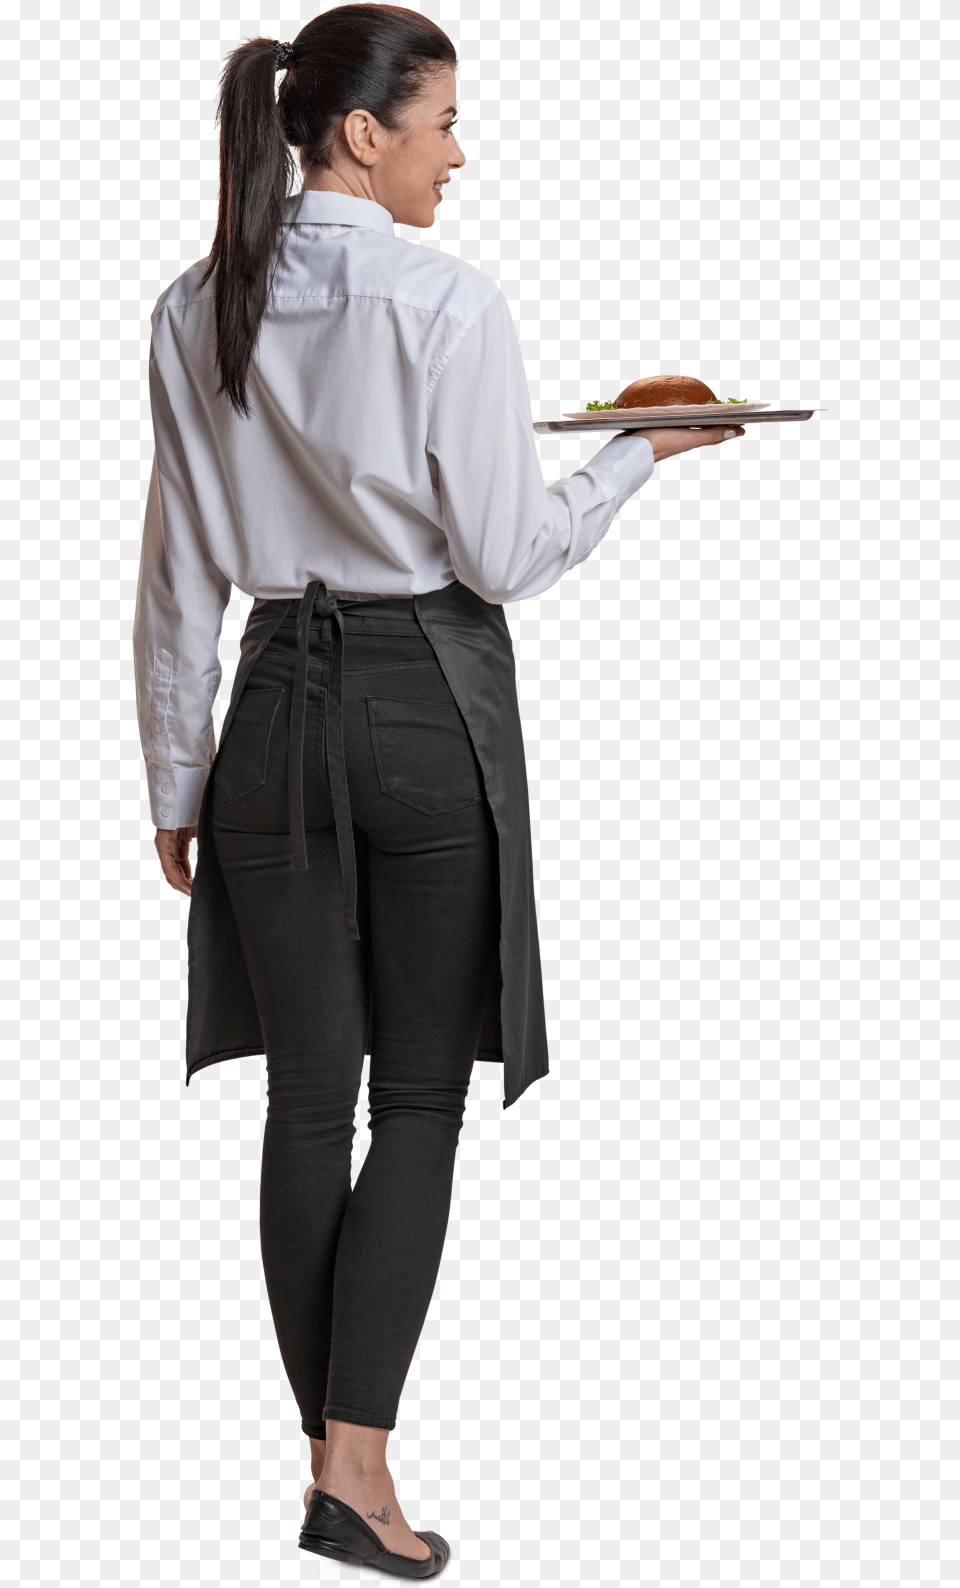 Cut Out Woman Waitress With Foow Professions And Services Waiter, Long Sleeve, Pants, Blouse, Clothing Png